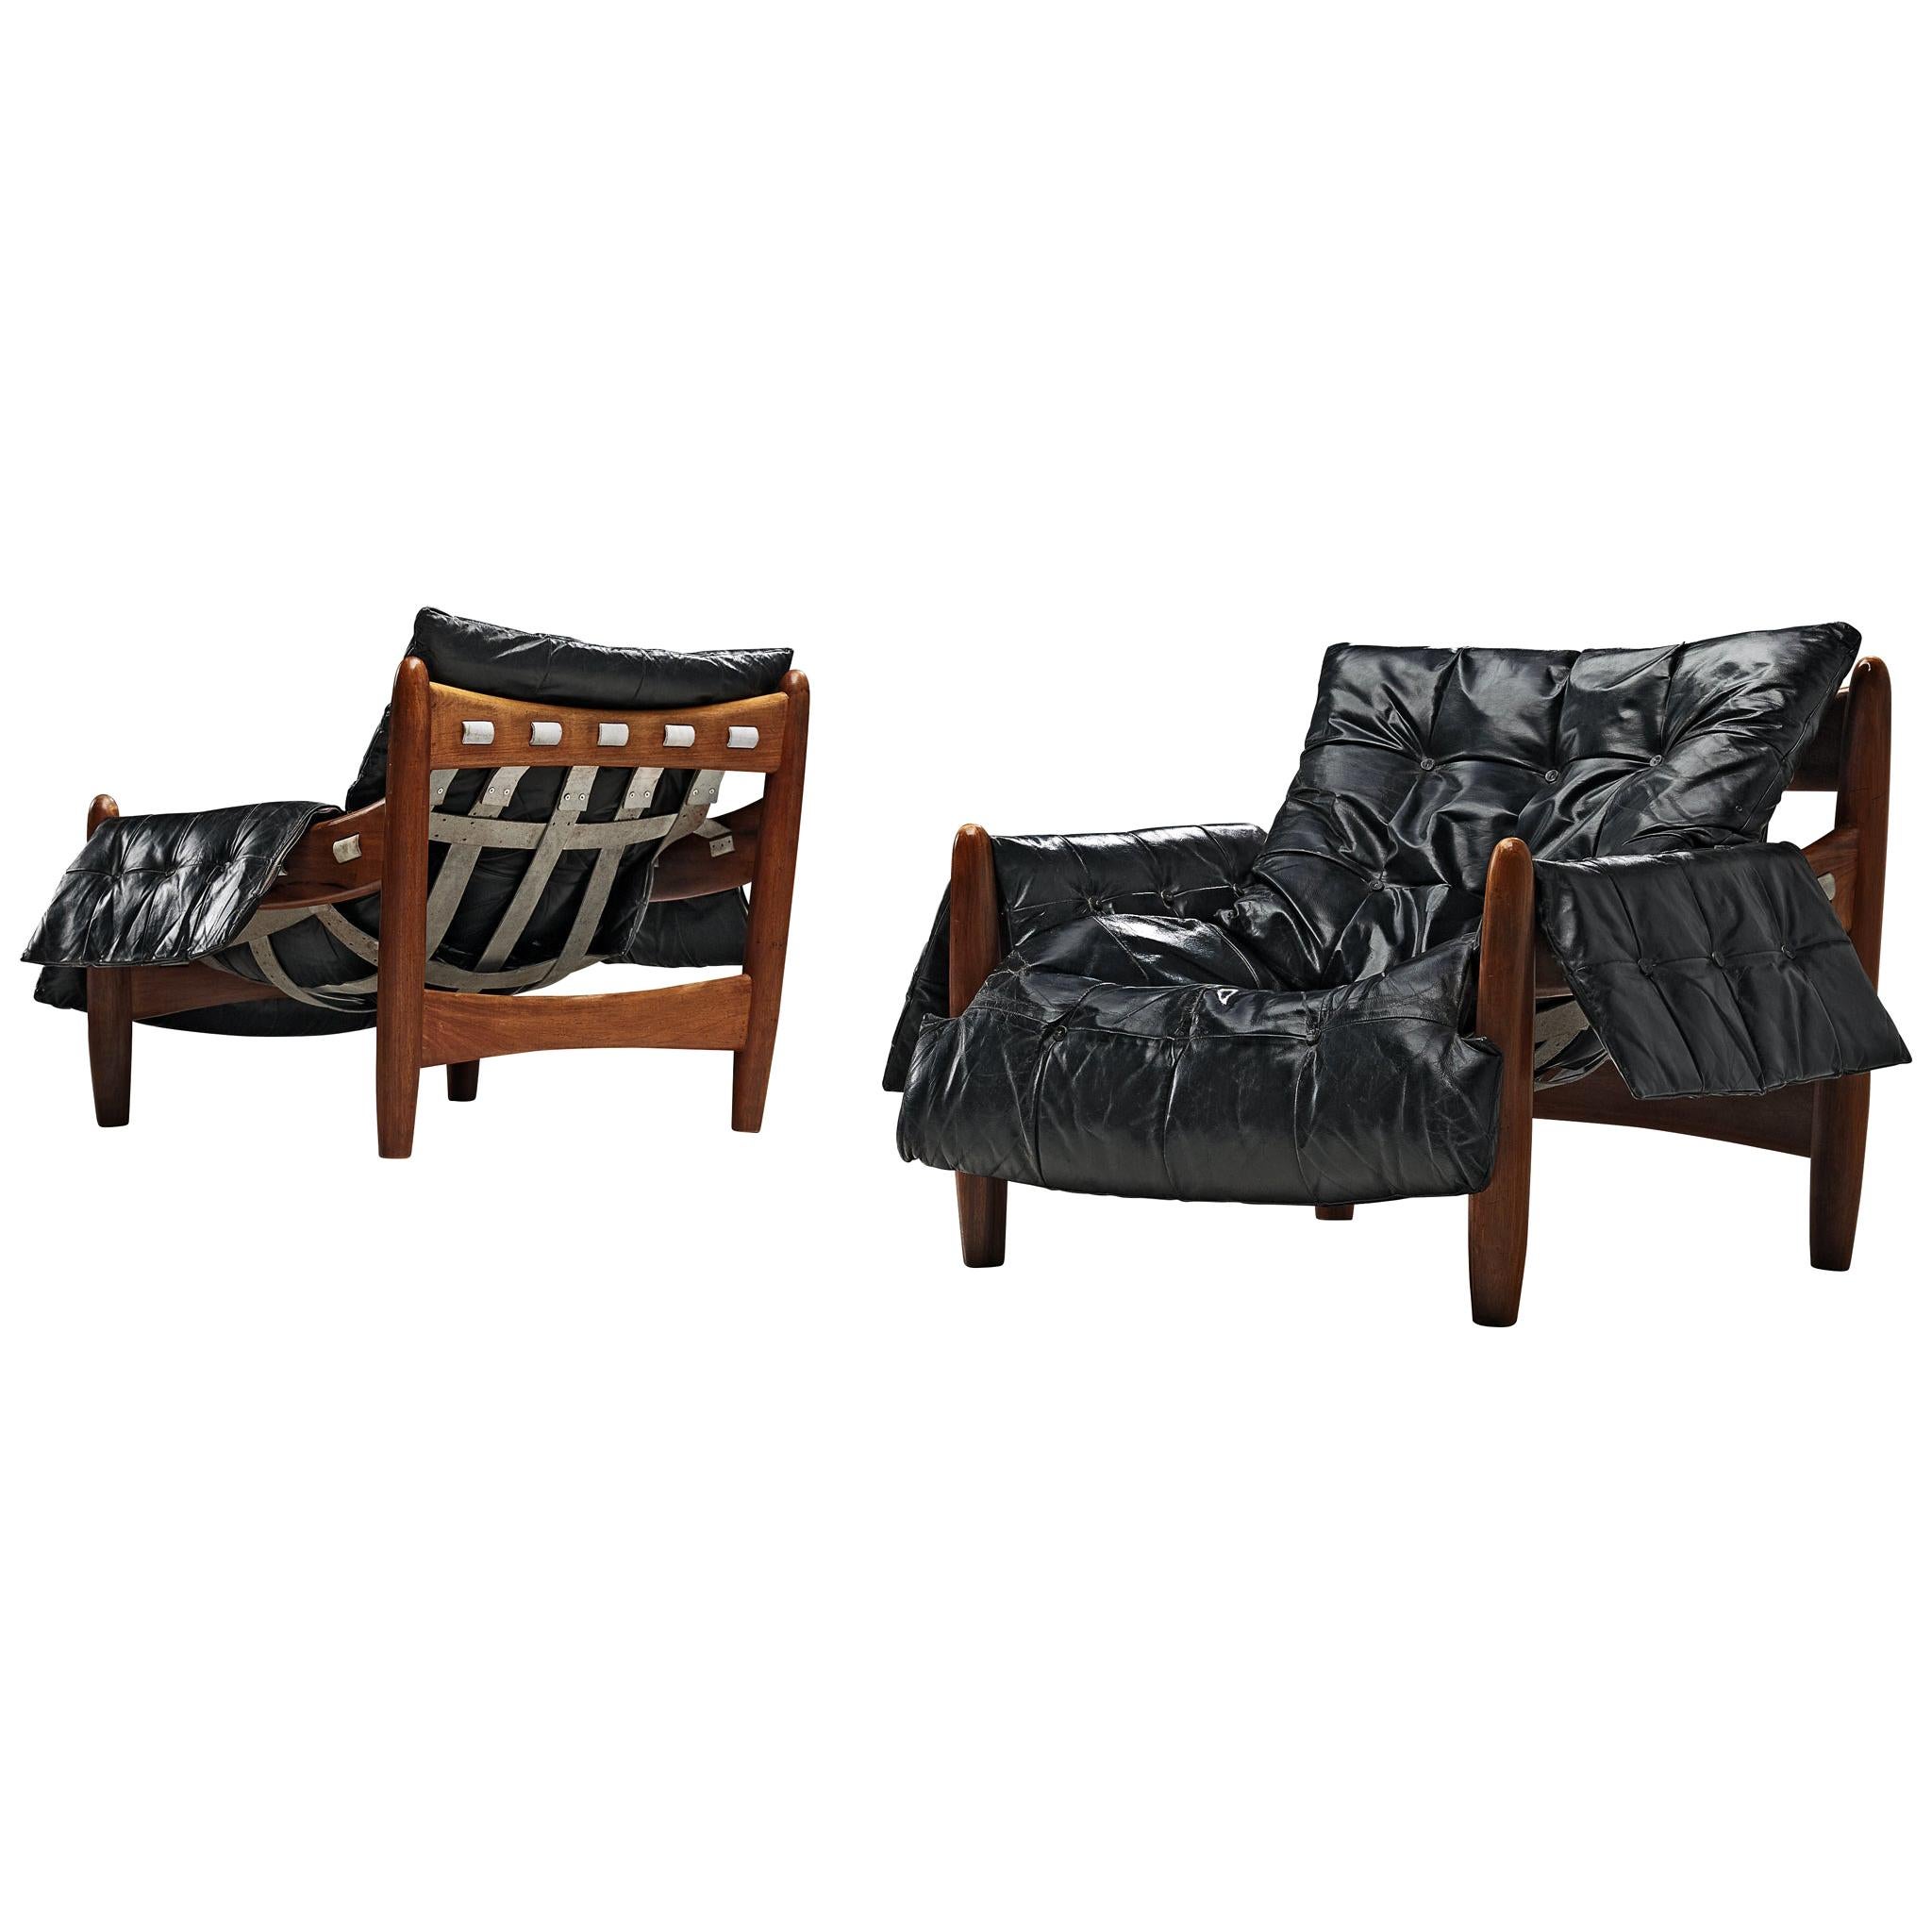 Sergio Rodrigues 'Sheriff' Pair of Lounge Chairs in Black Leather